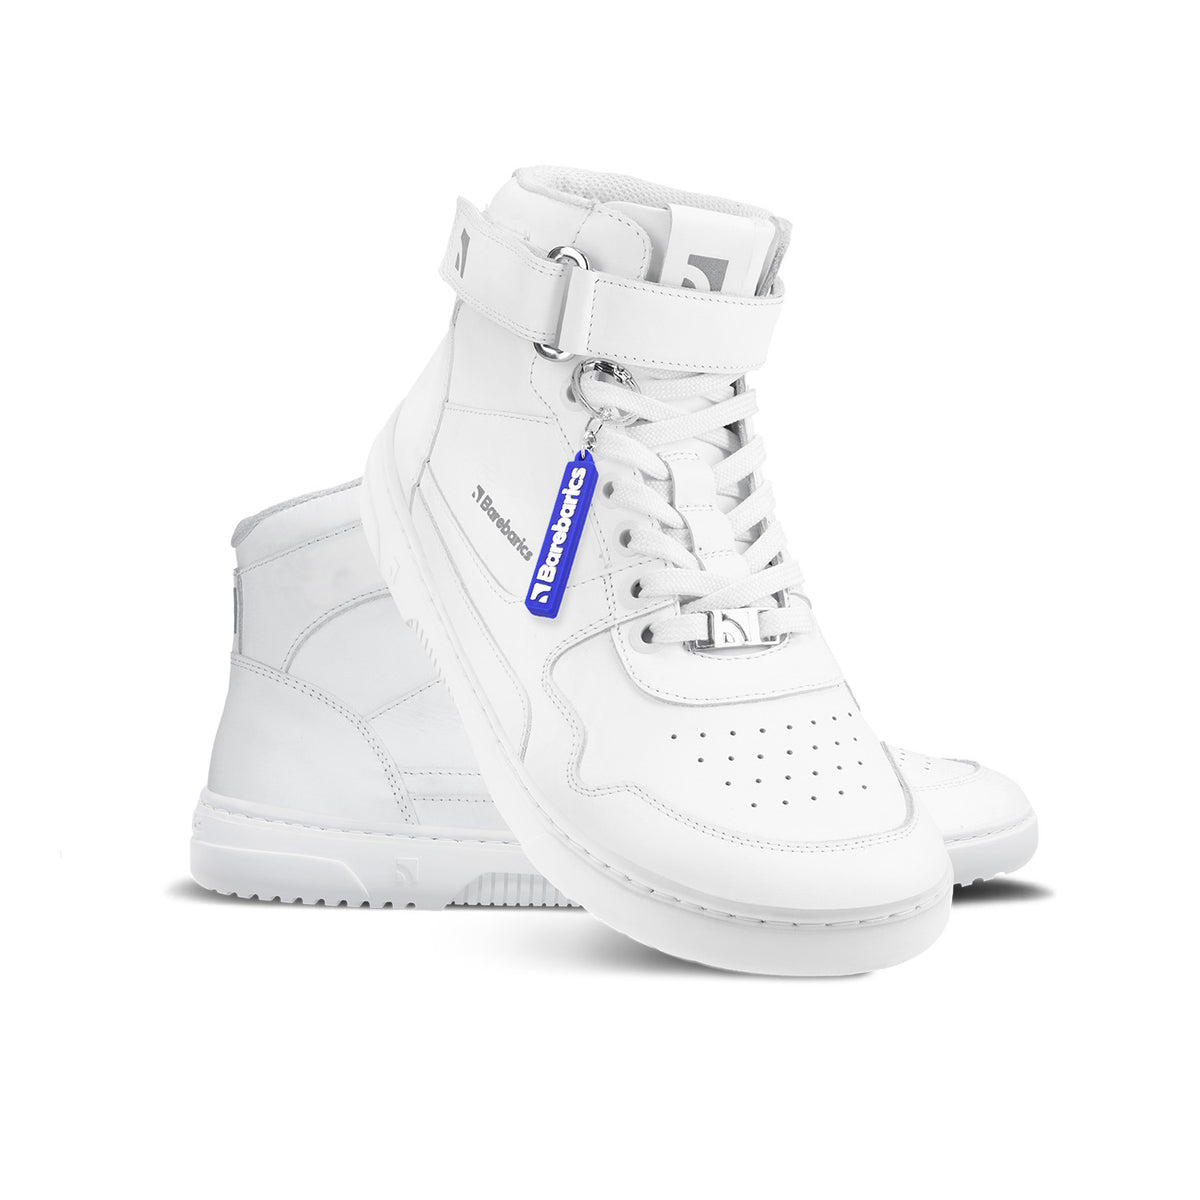 Barefoot Sneakers Barebarics Zing - High Top - All White - Leather 2  - OzBarefoot